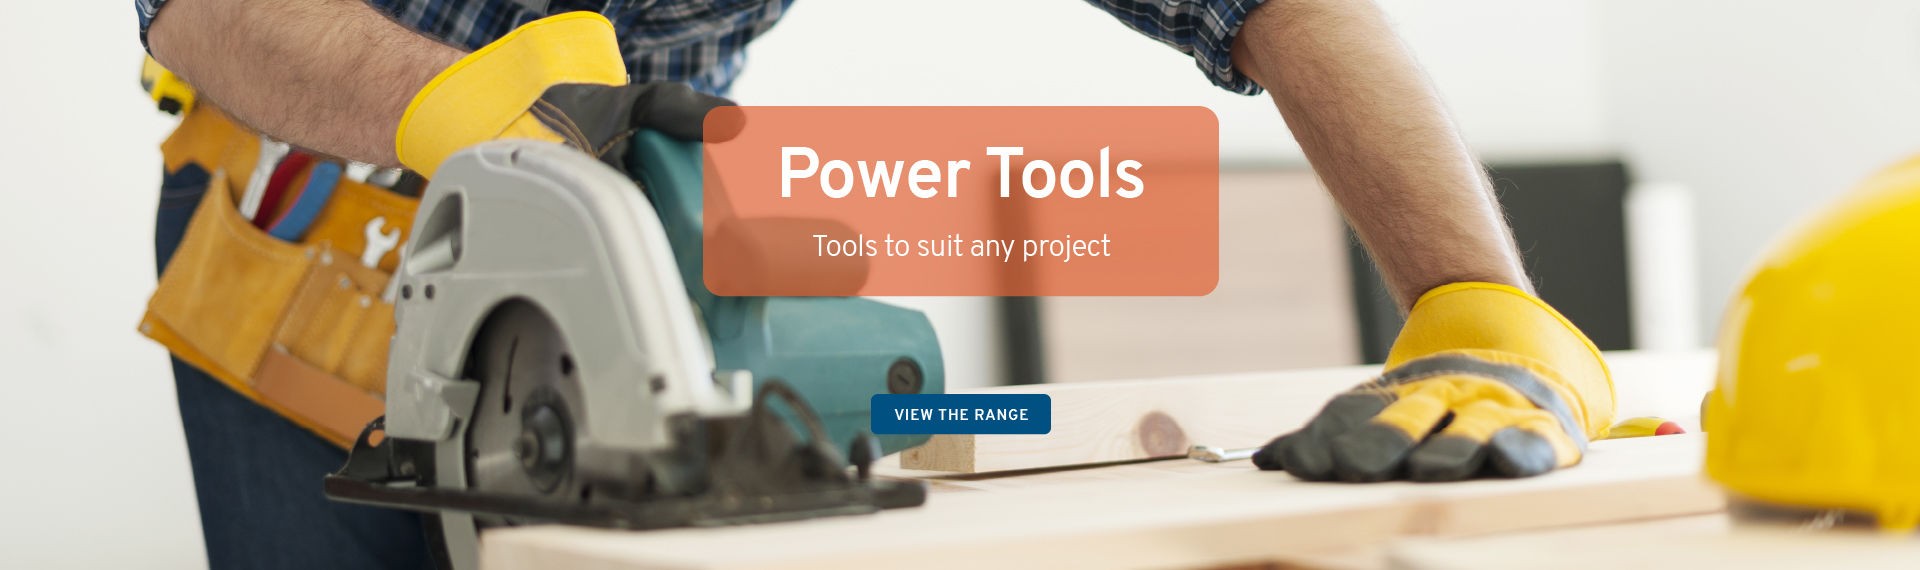 Power Tools - Tools to suit any project